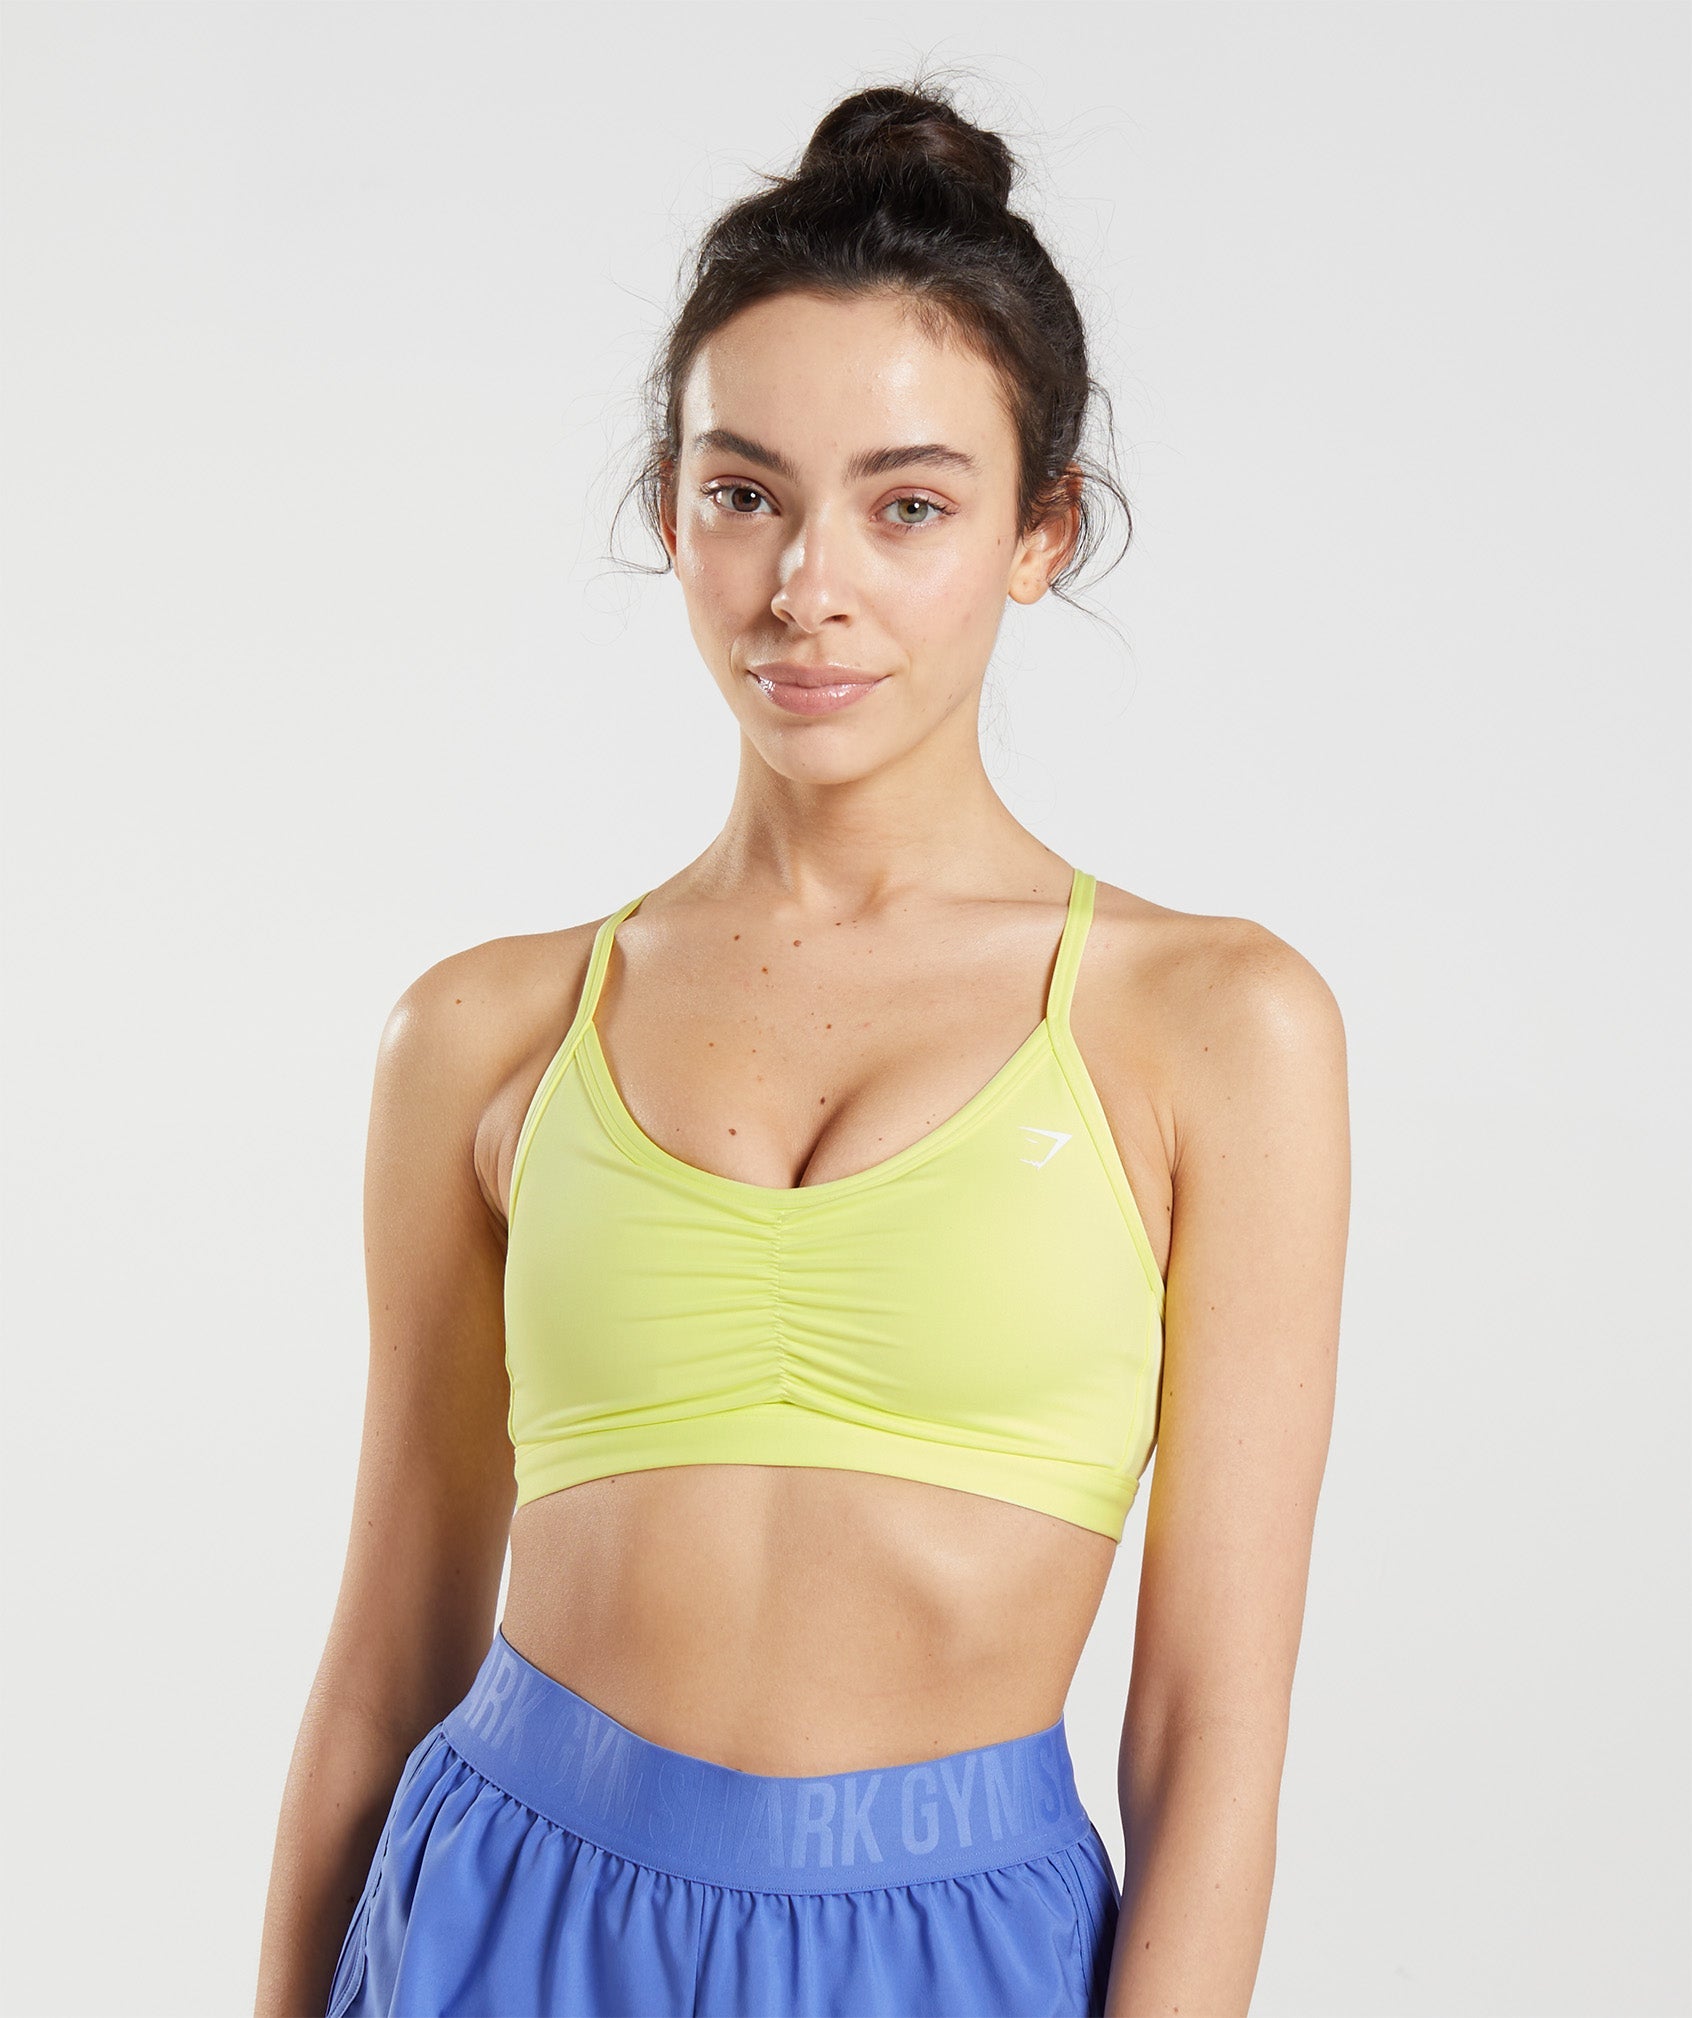 Gymshark Ruched Strappy Sports Bra - Classic Pink